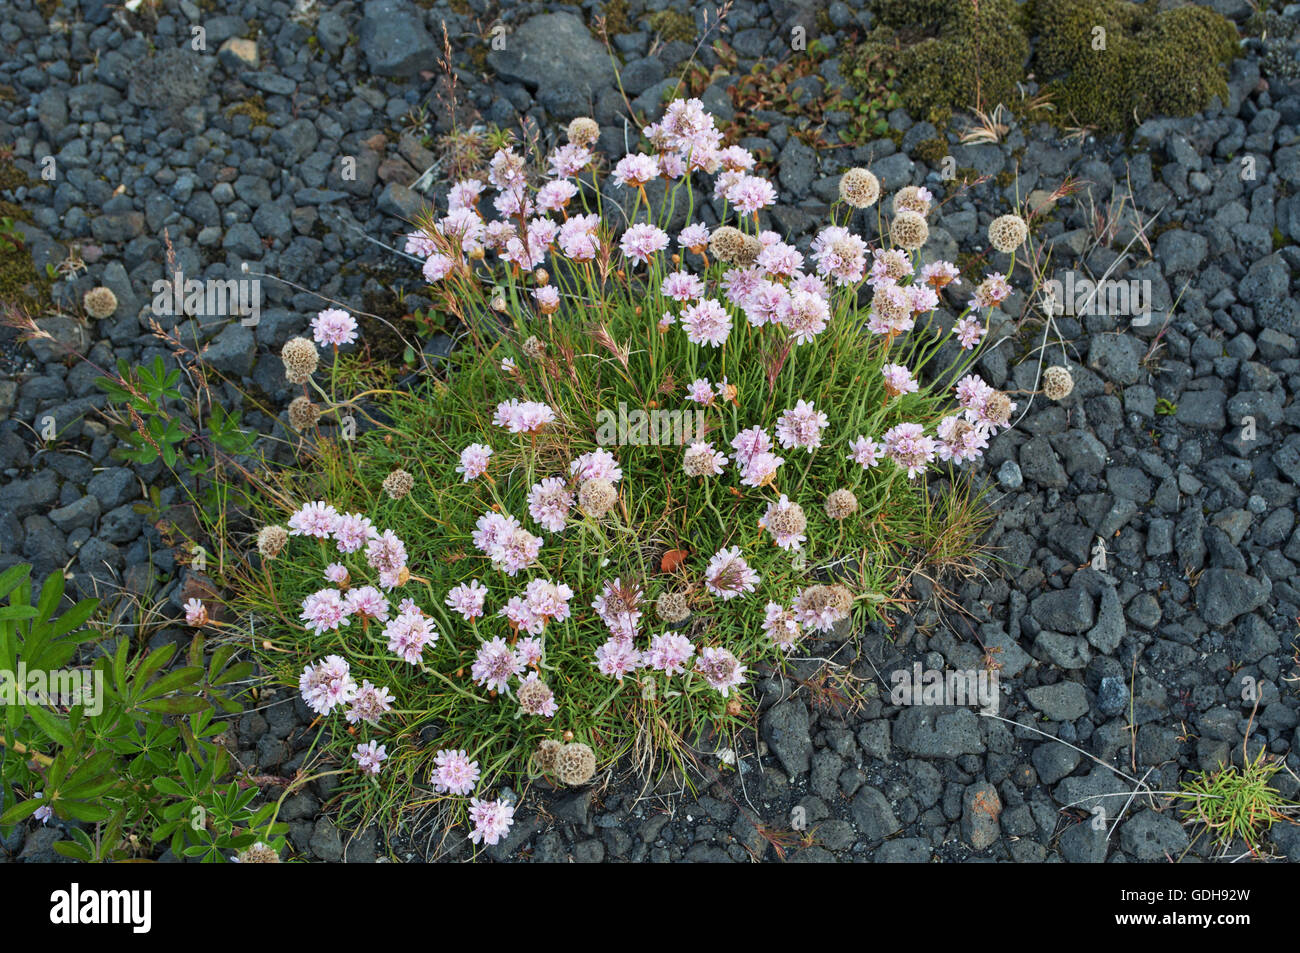 Iceland: pink flowers growing on lava ground covered with a green carpet of moss Stock Photo